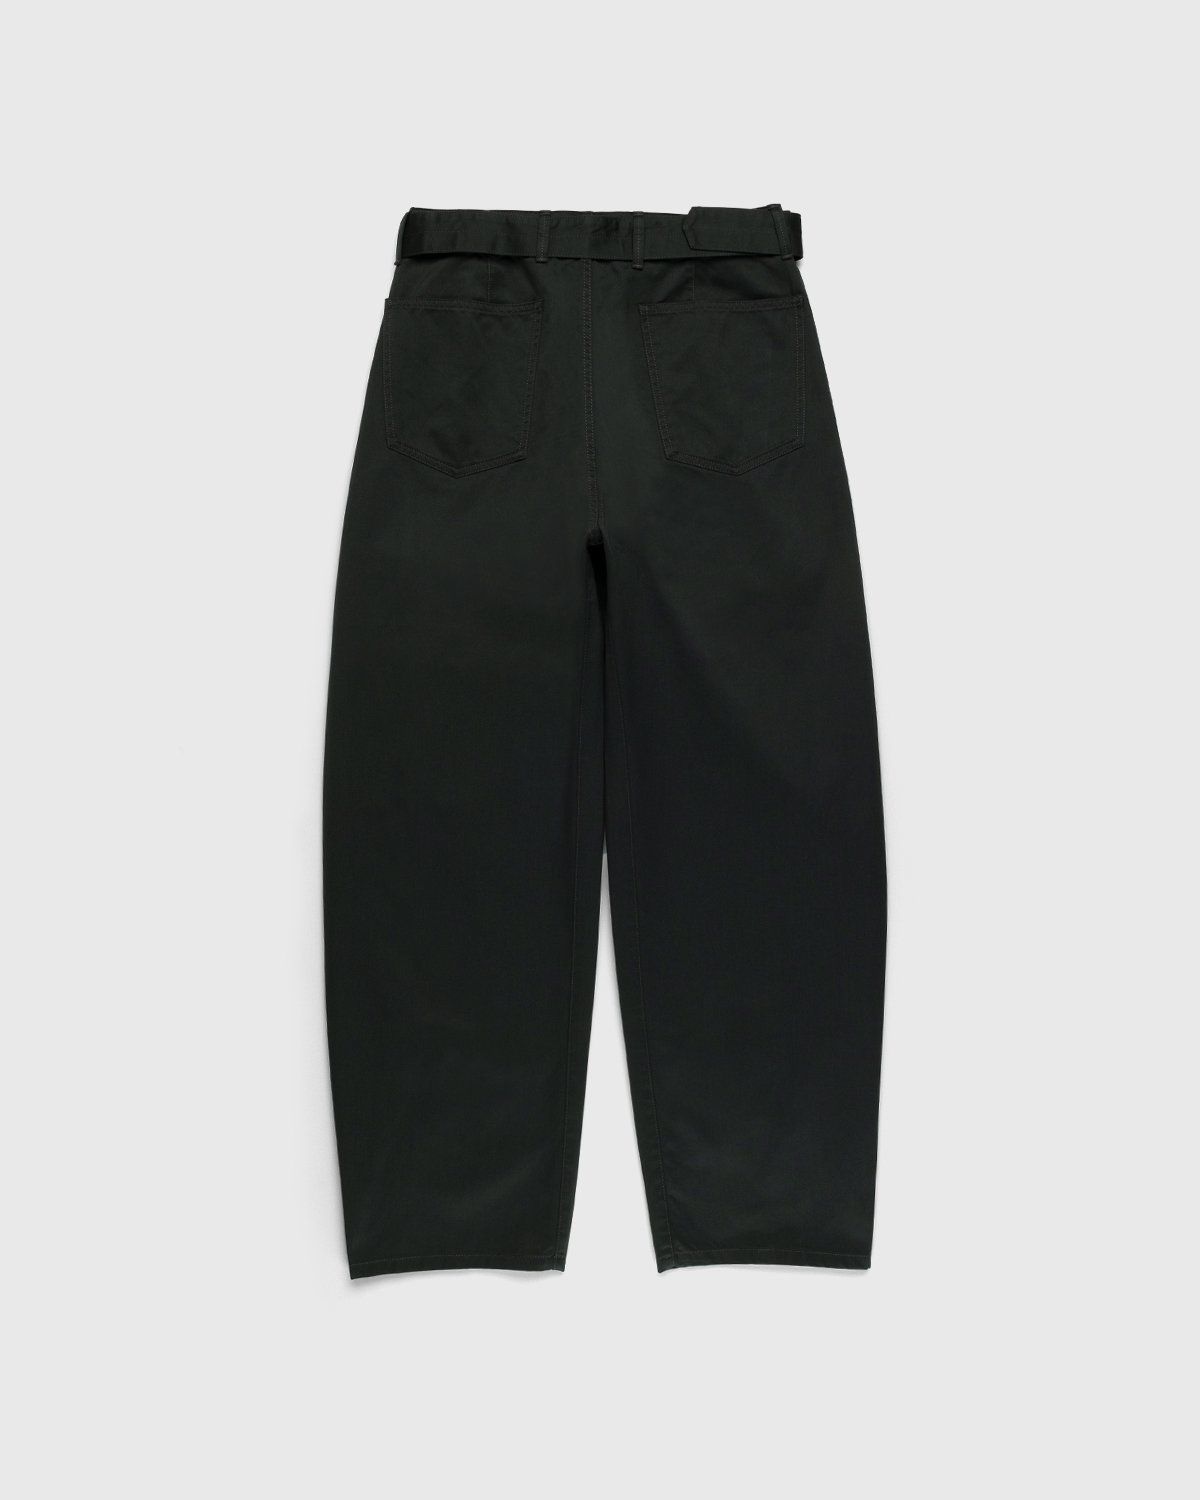 Lemaire – Twisted Belted Pants Dark Slate Green - Image 2